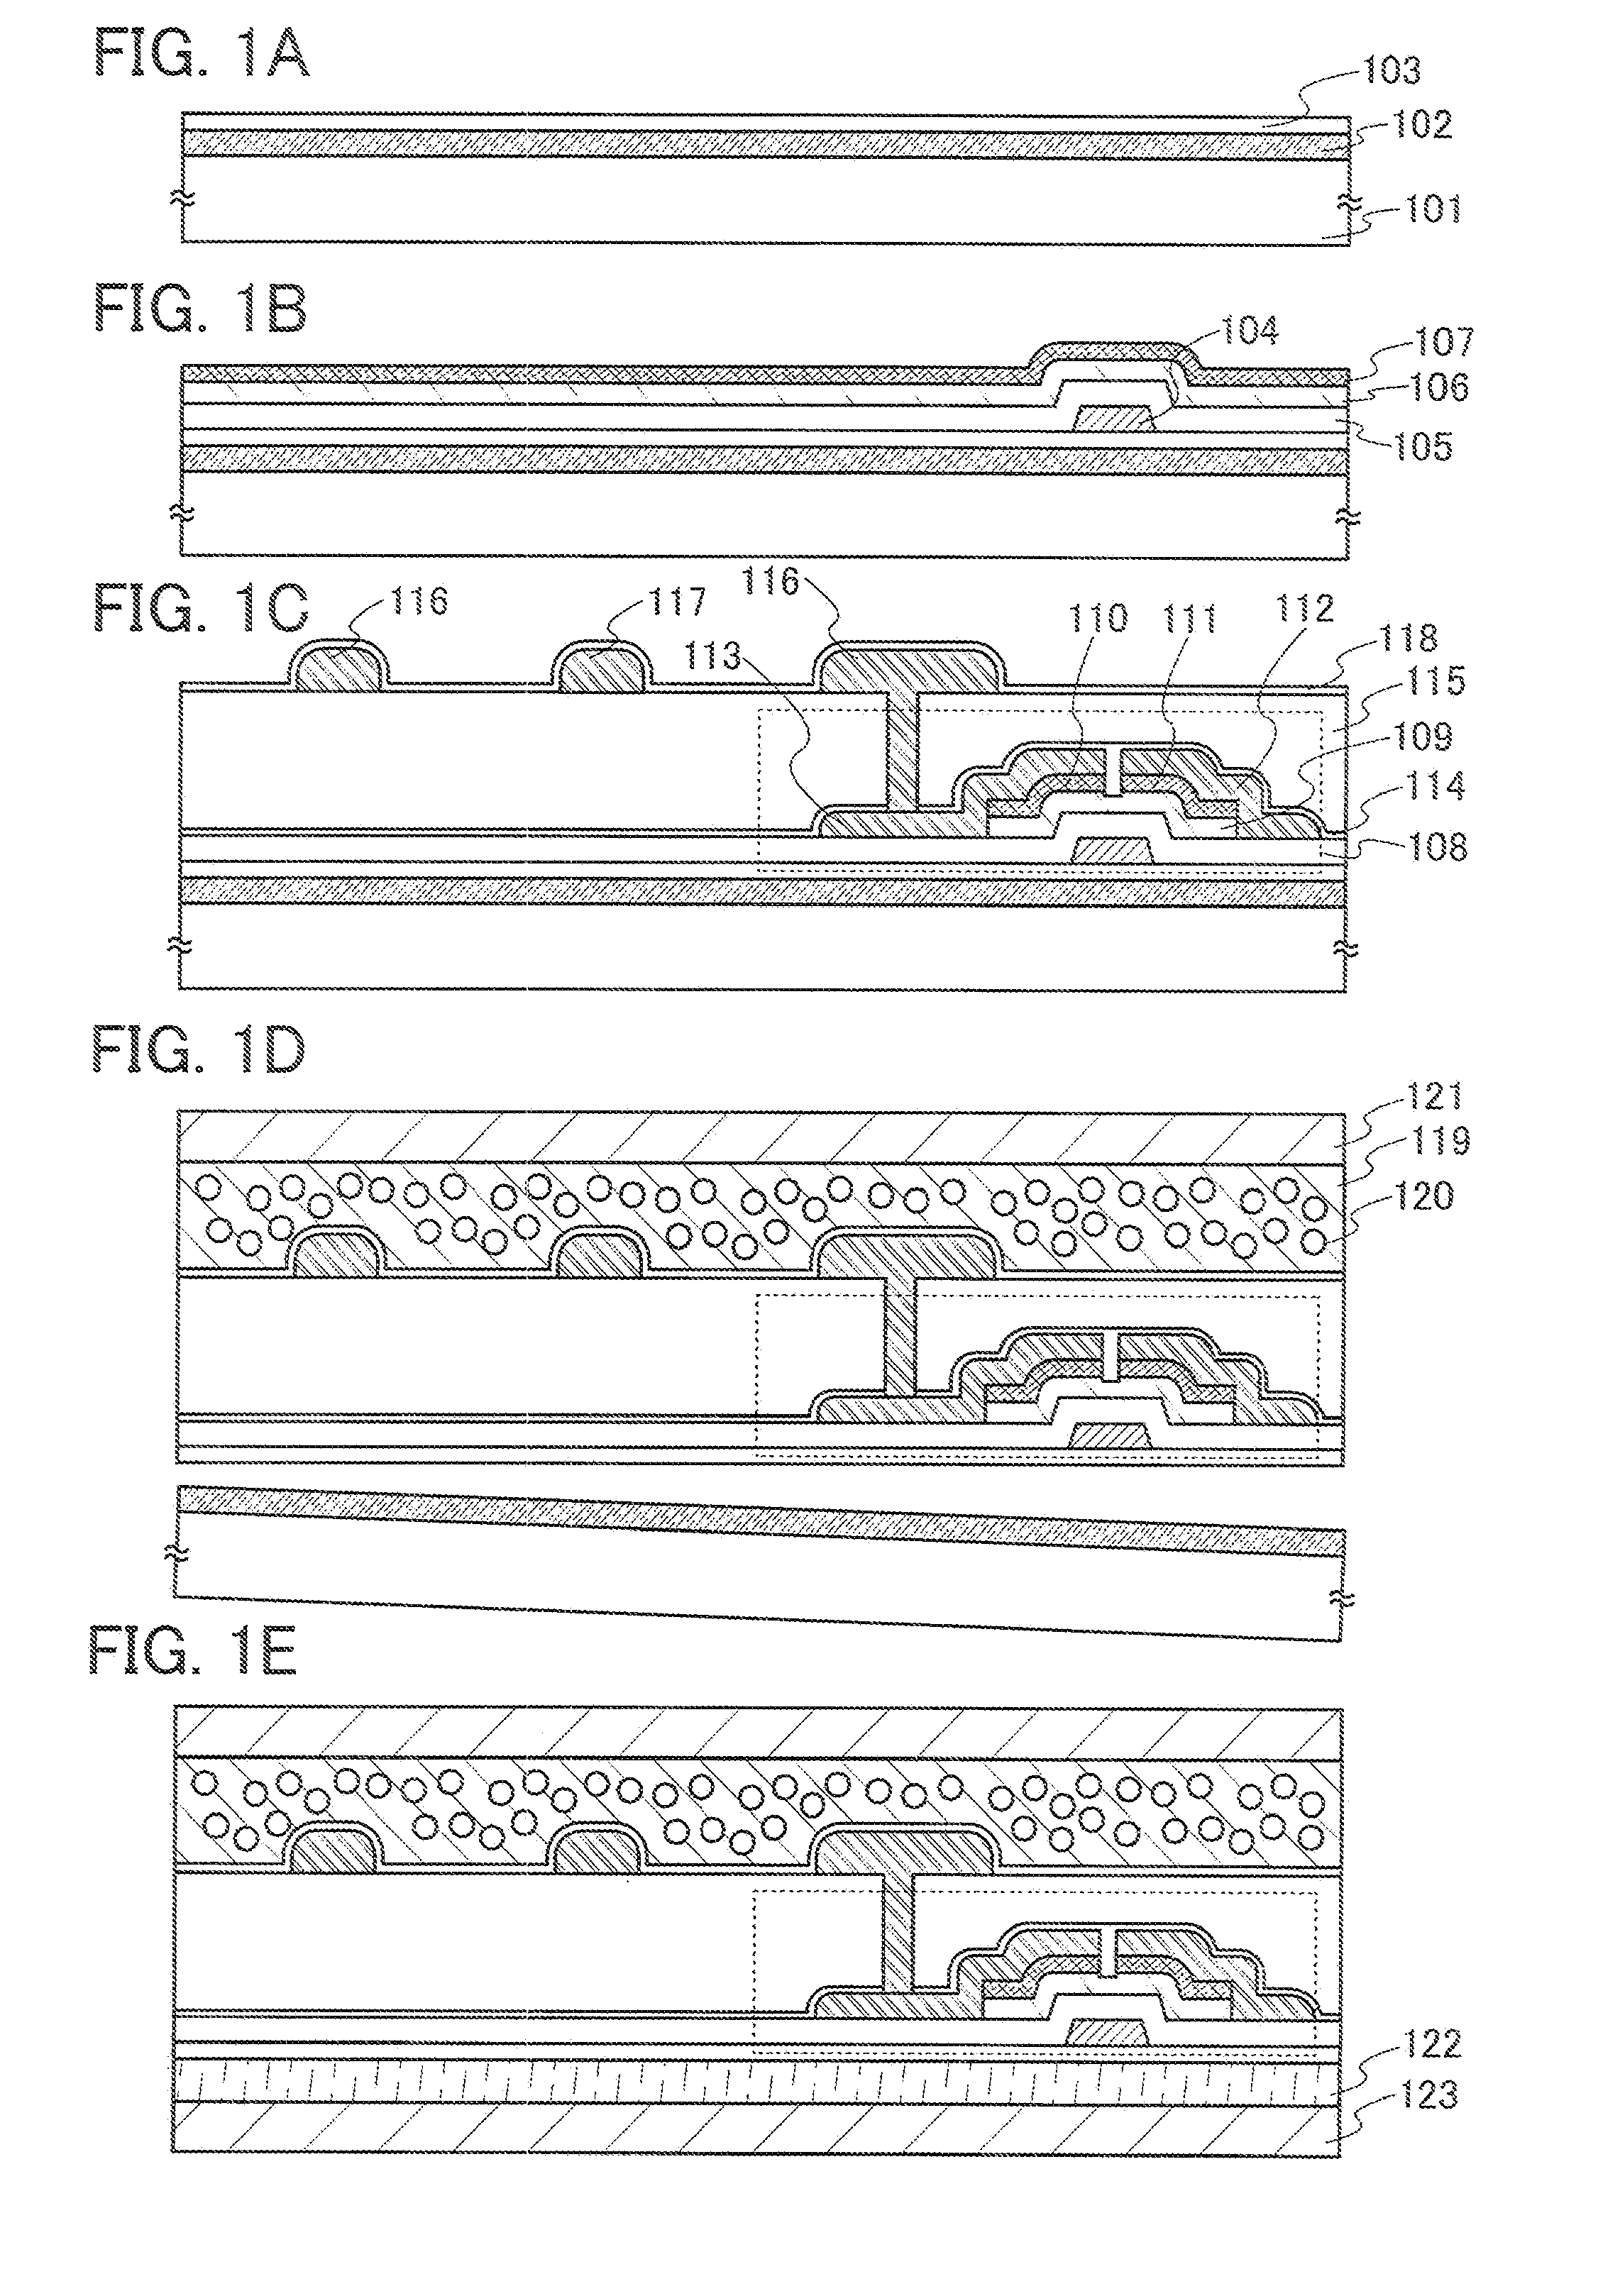 Method for manufacturing a semiconductor device using a flexible substrate